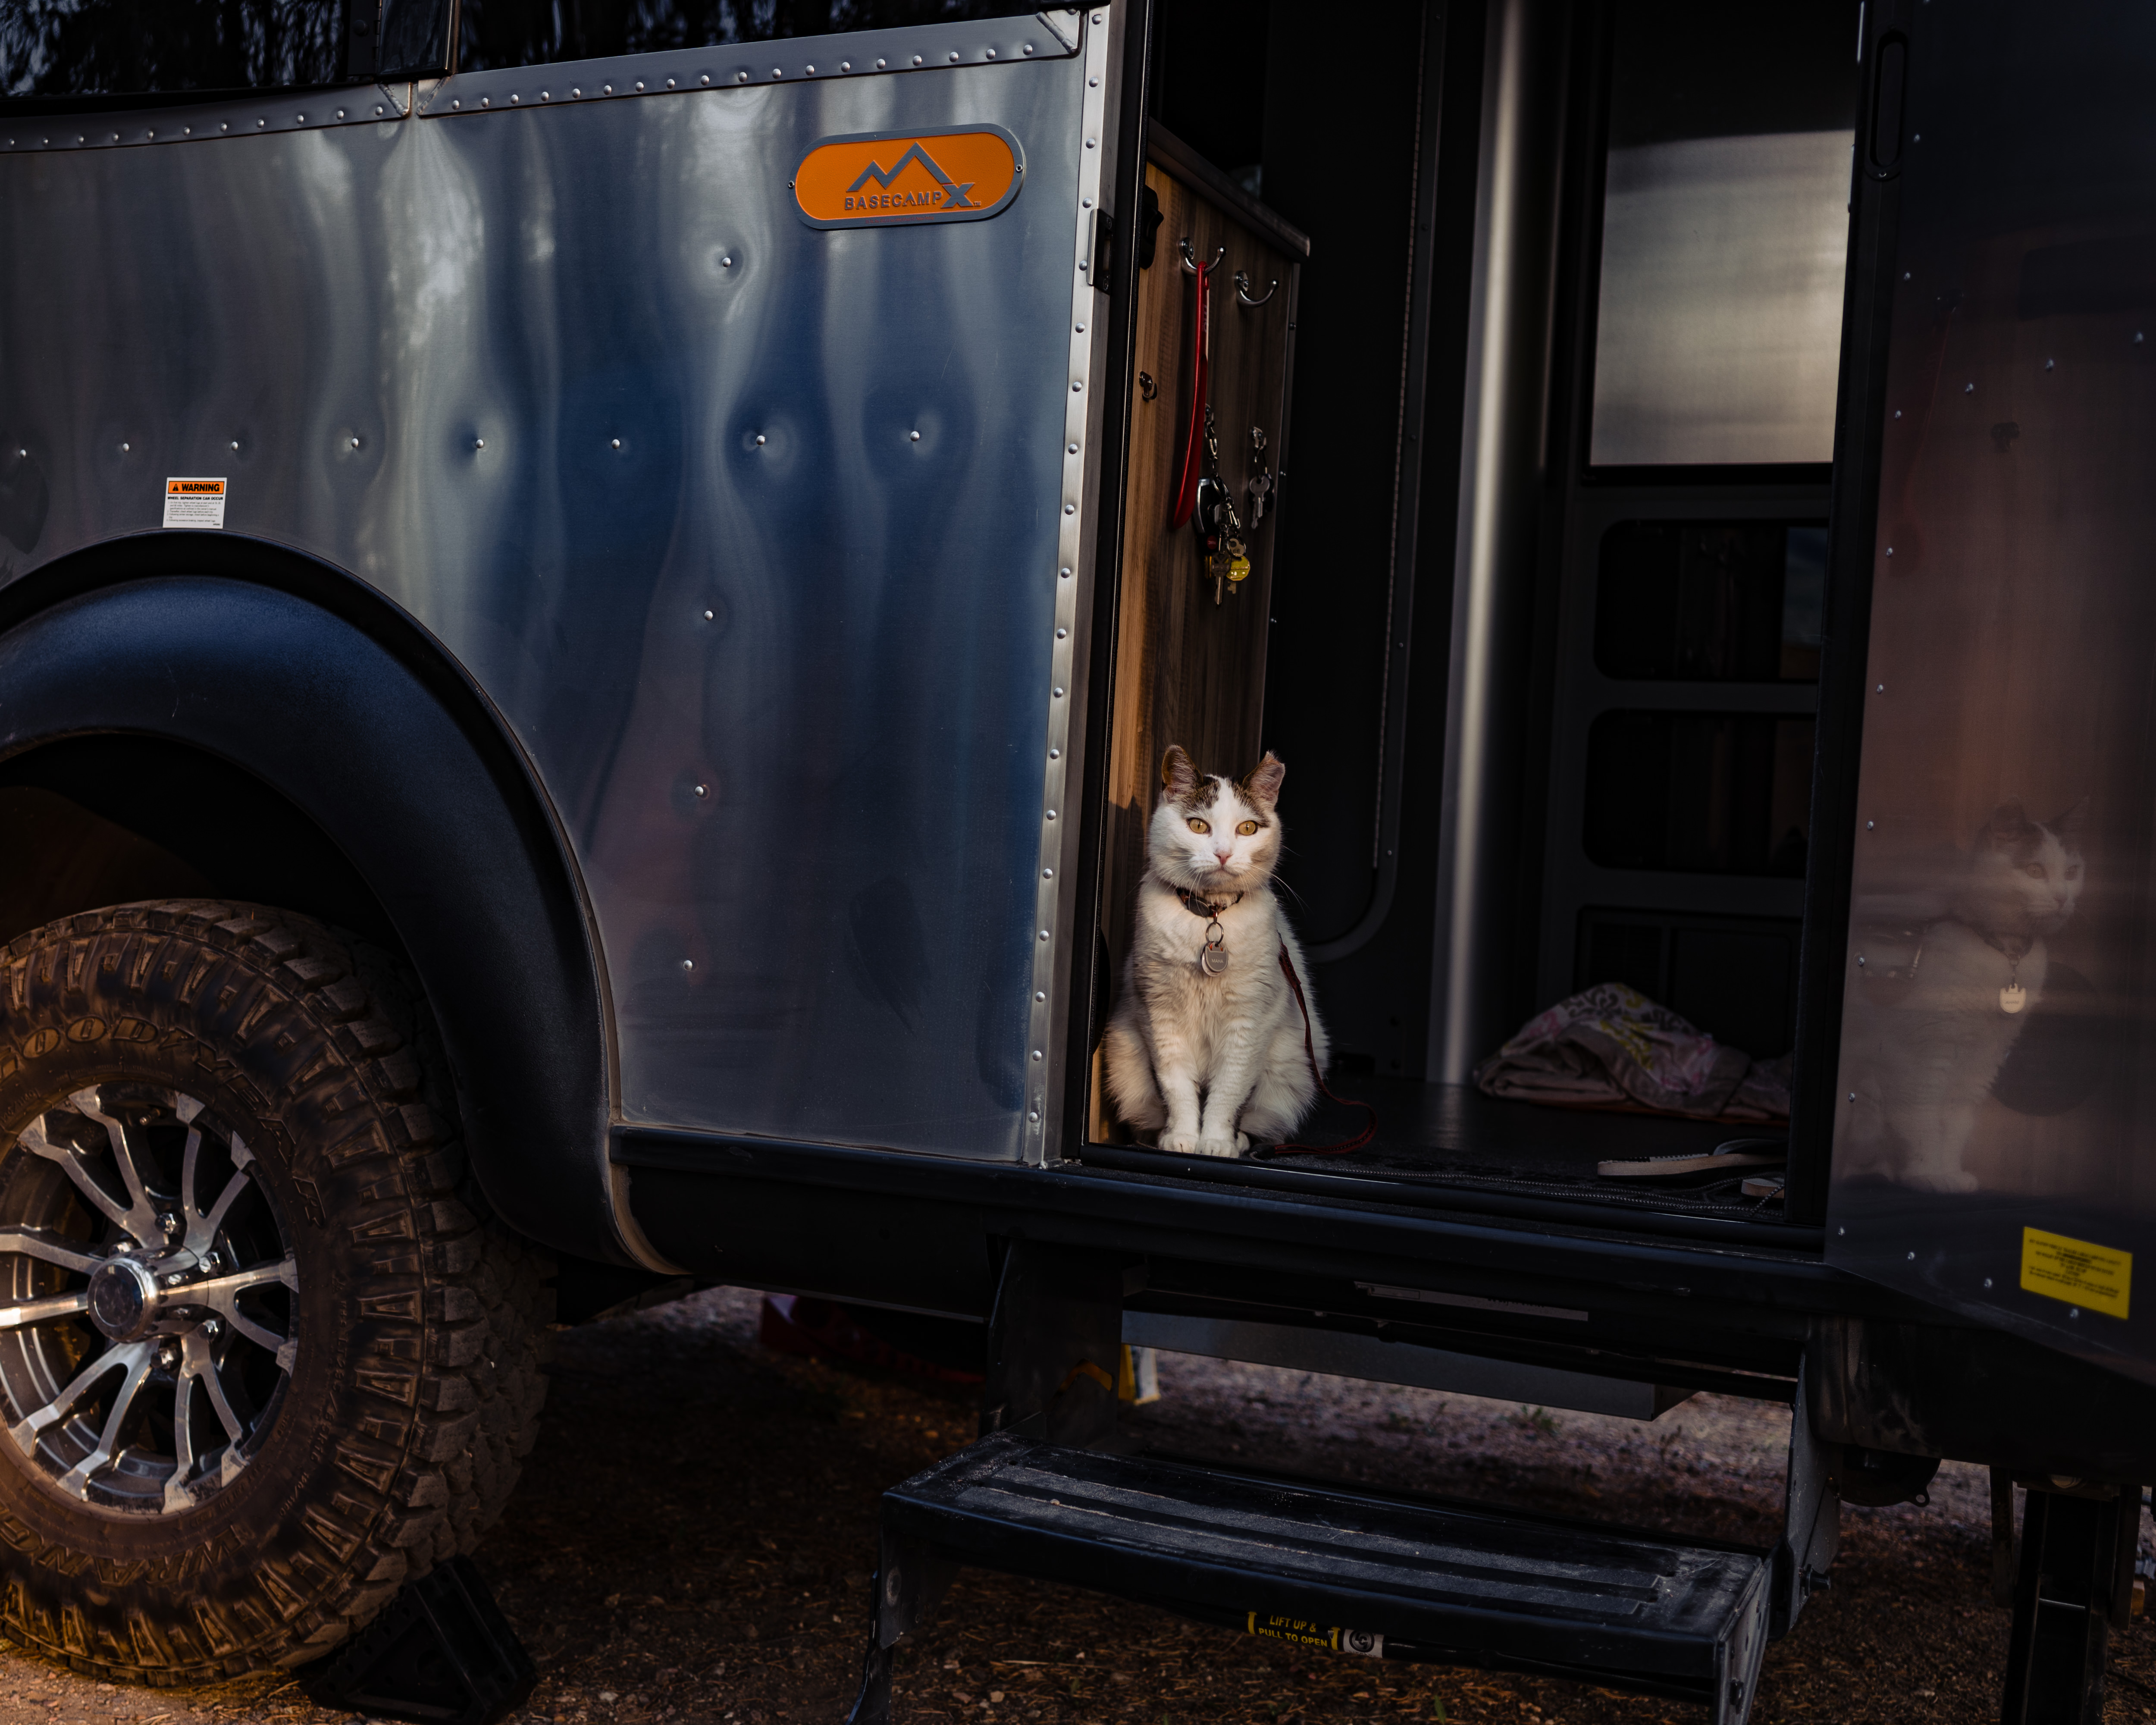 Maha (cat) at Moose Lake Campground · Photo by The 38 Photography